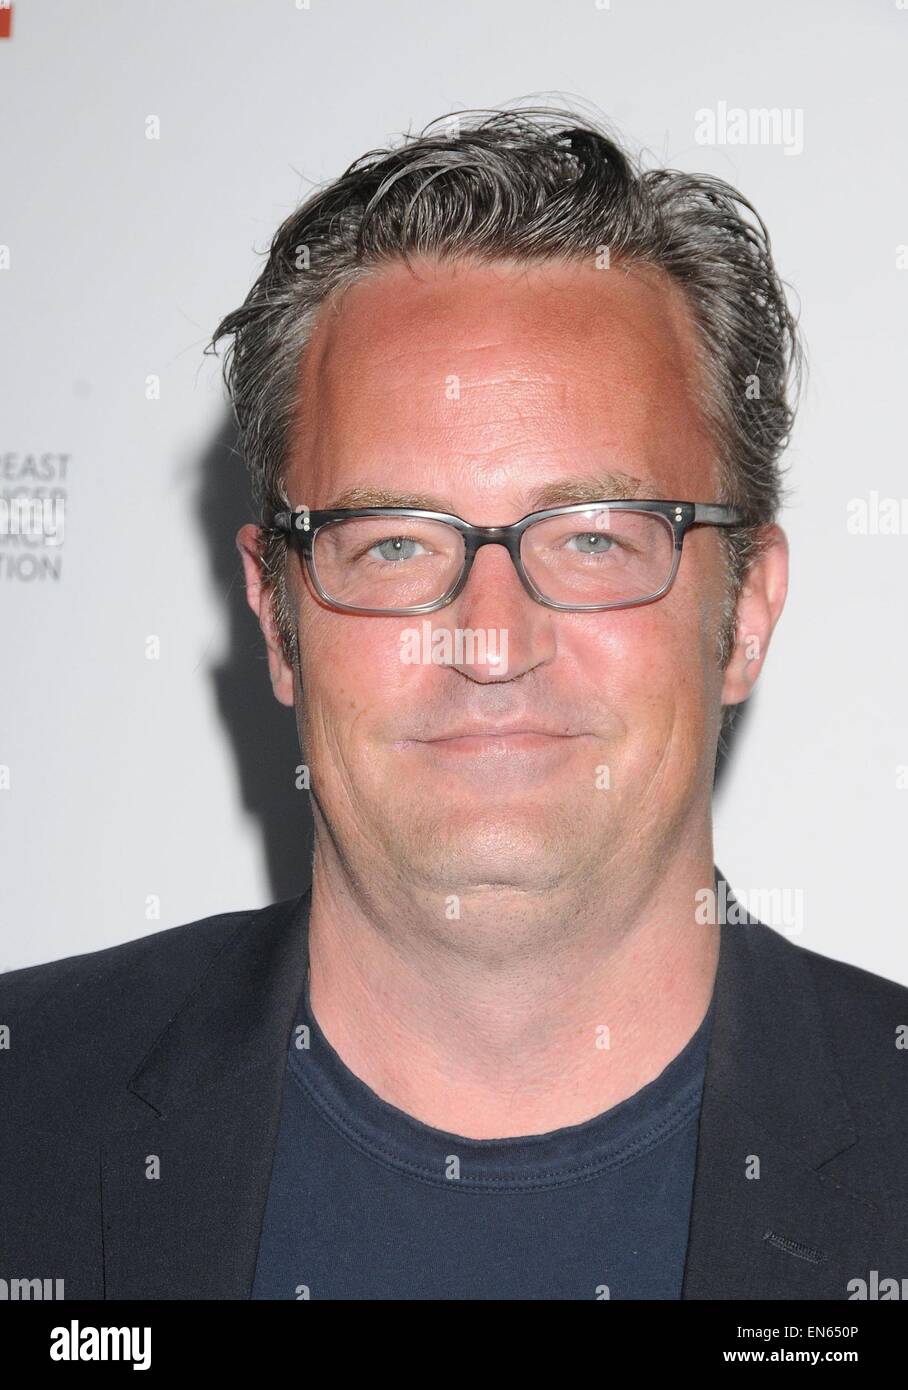 Los Angeles, California, USA. 28th Apr, 2015. Actor MATTHEW PERRY at the 'Ride' Los Angeles at the Archlight Hollywood Theater. Credit:  Paul Fenton/ZUMA Wire/Alamy Live News Stock Photo